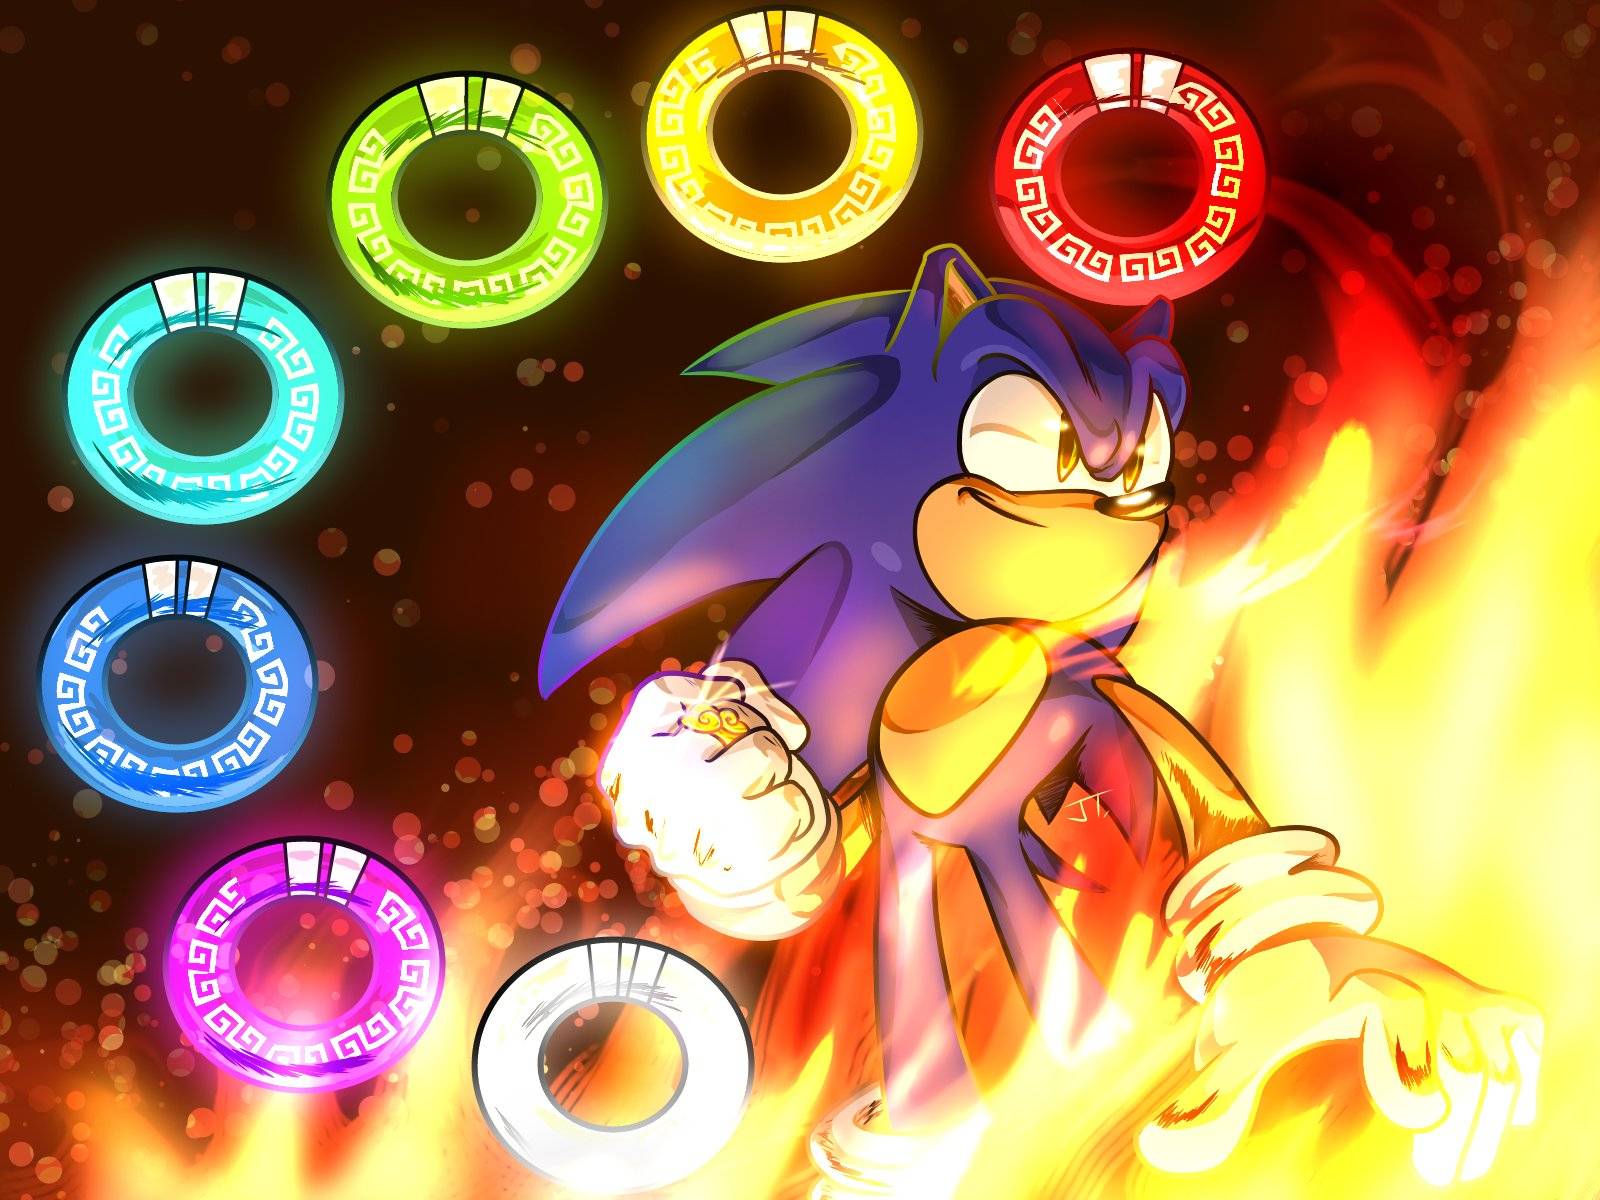 Sonic The Hedgehog: Seven Rings in the hand by flakus1012sonic on